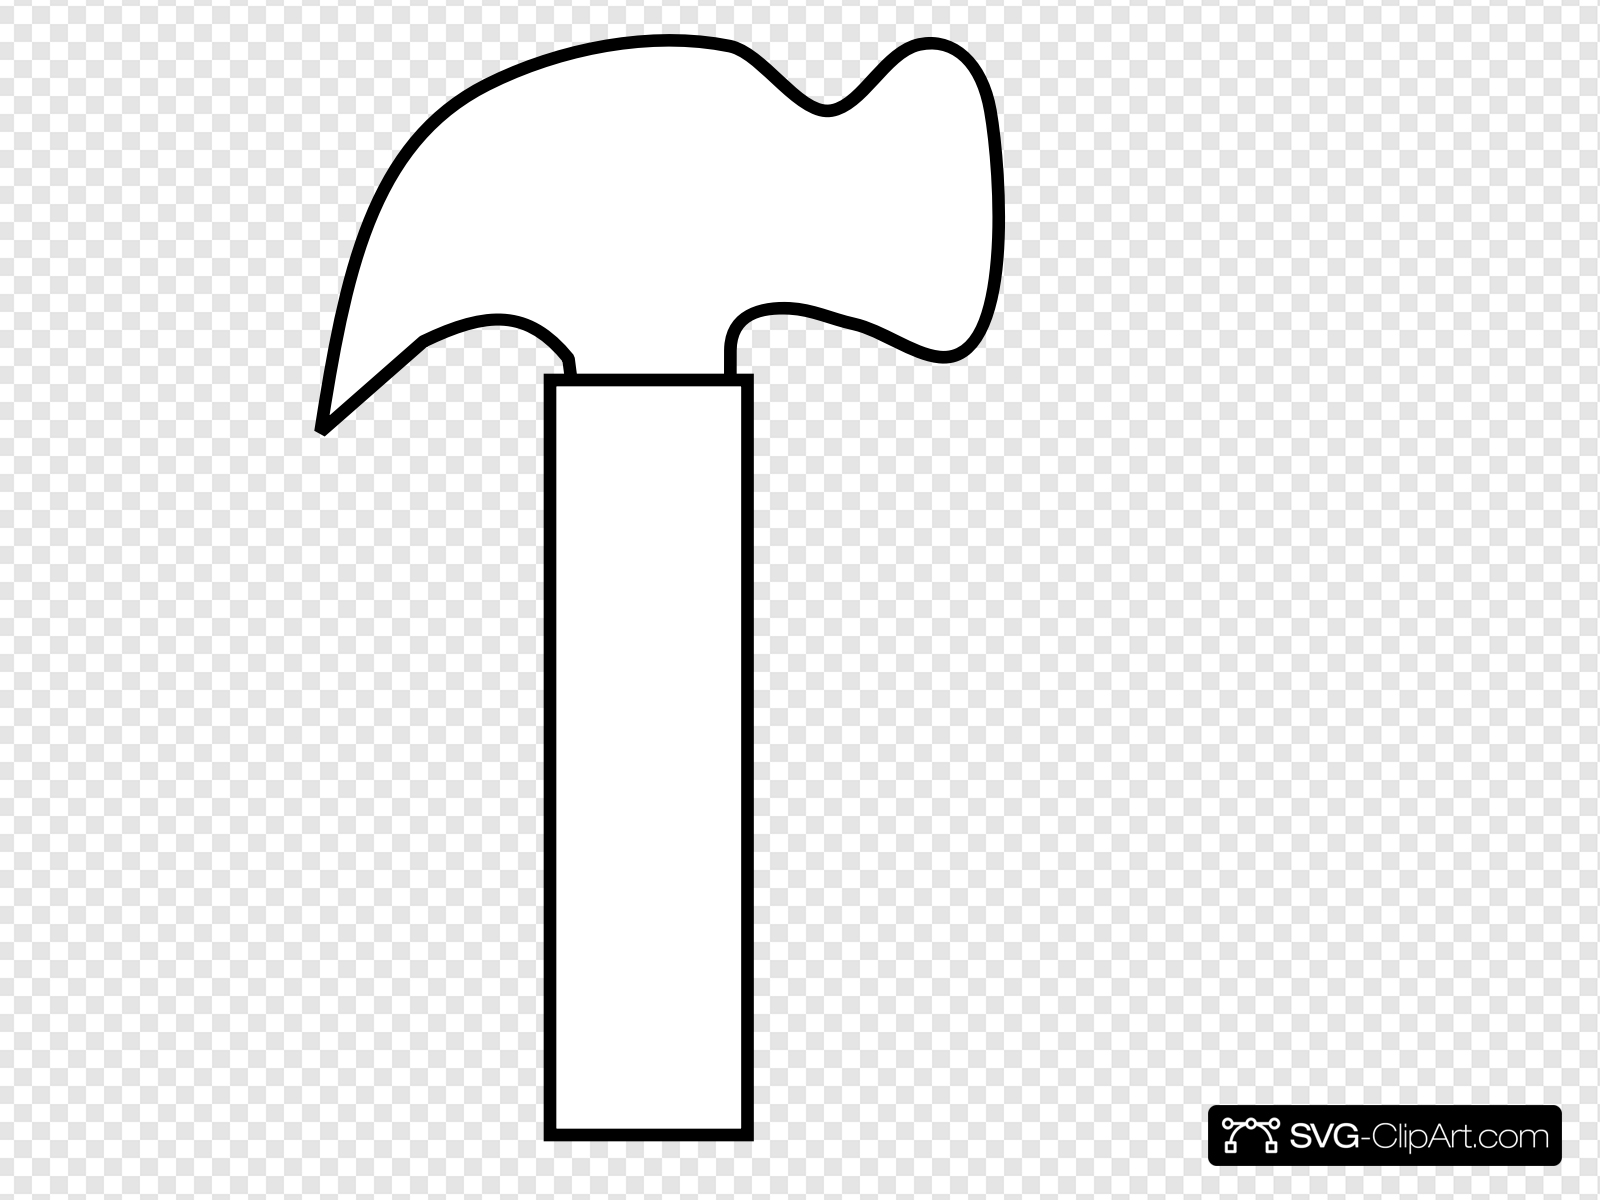 New White Hammer Clip art, Icon and SVG.